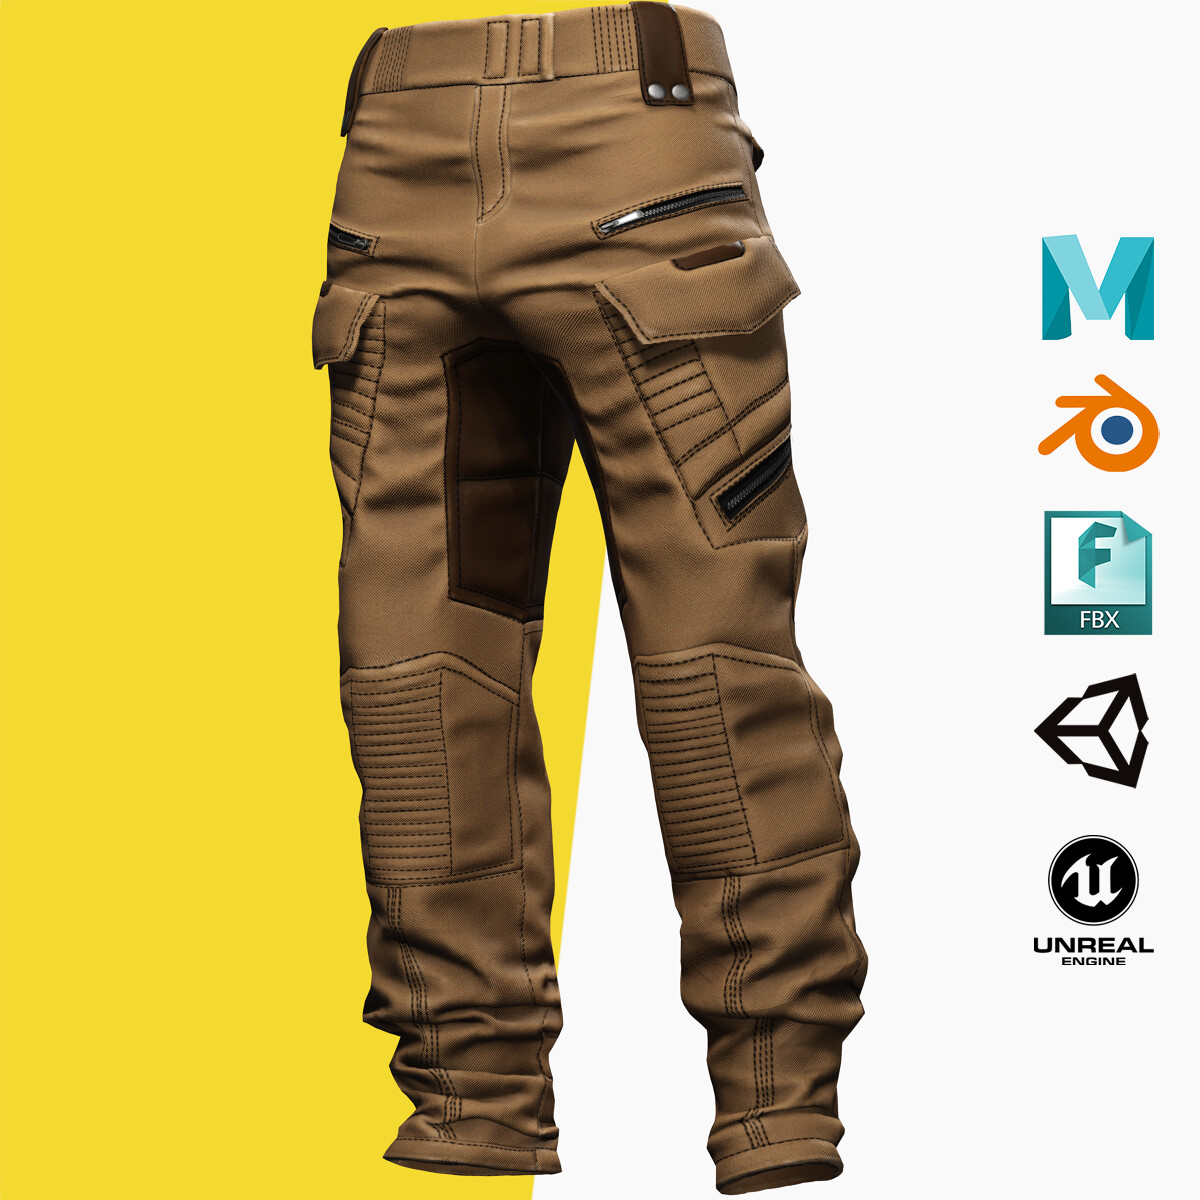 ArtStation - Realistic Pants 1 for Men Rigged Low-poly 3D model